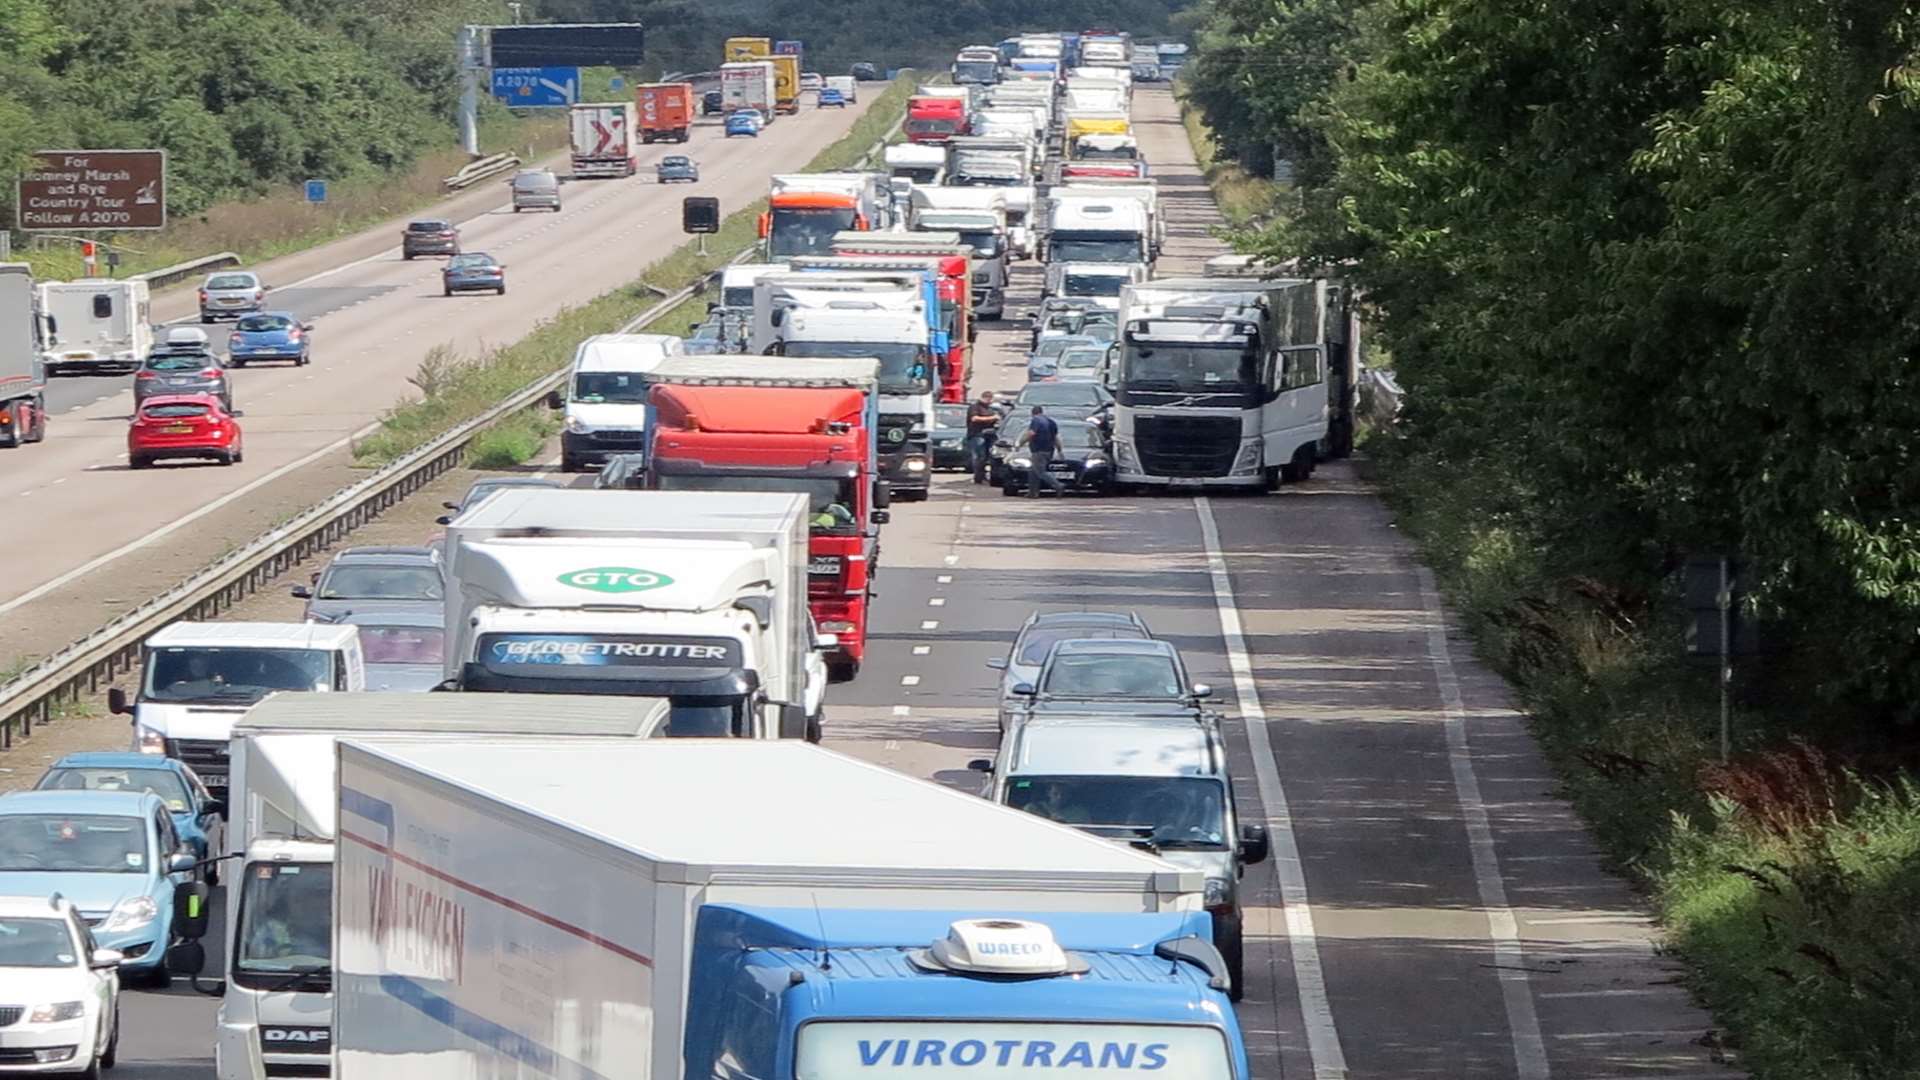 A lorry collided with a car on the M20